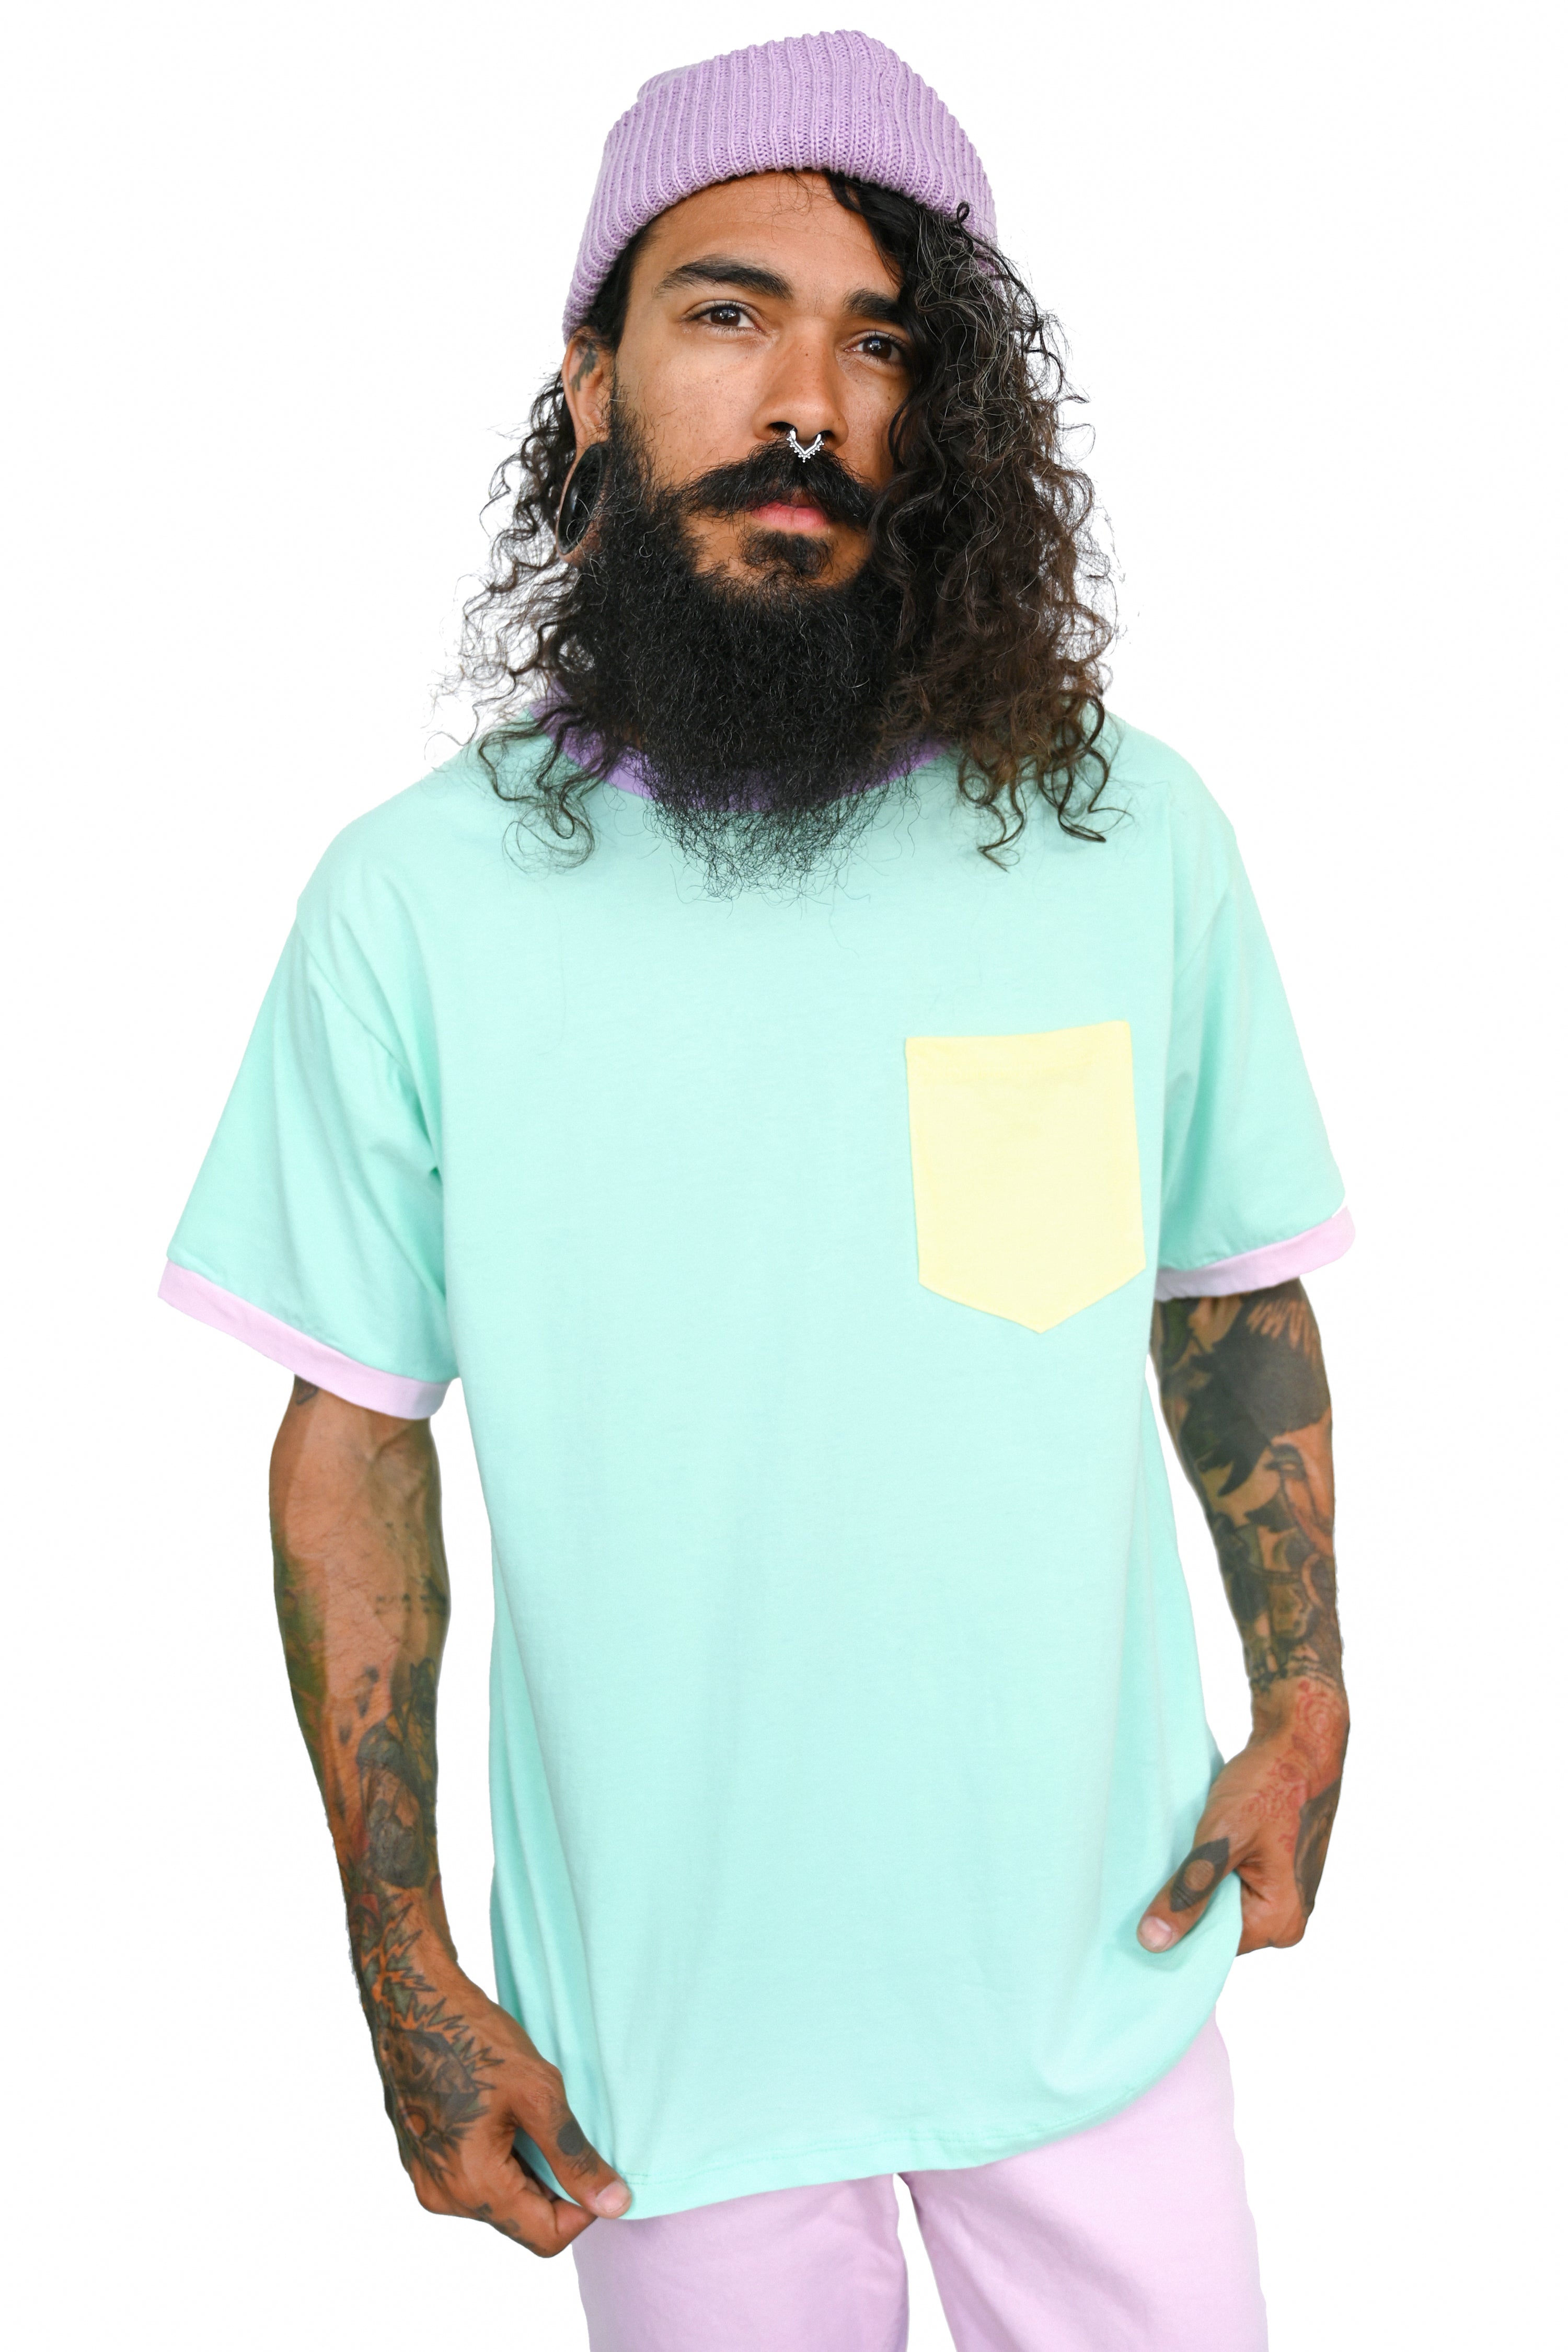 mint colorblock unisex t shirt with pink sleeve trim, yellow pocket, and lavender collar 